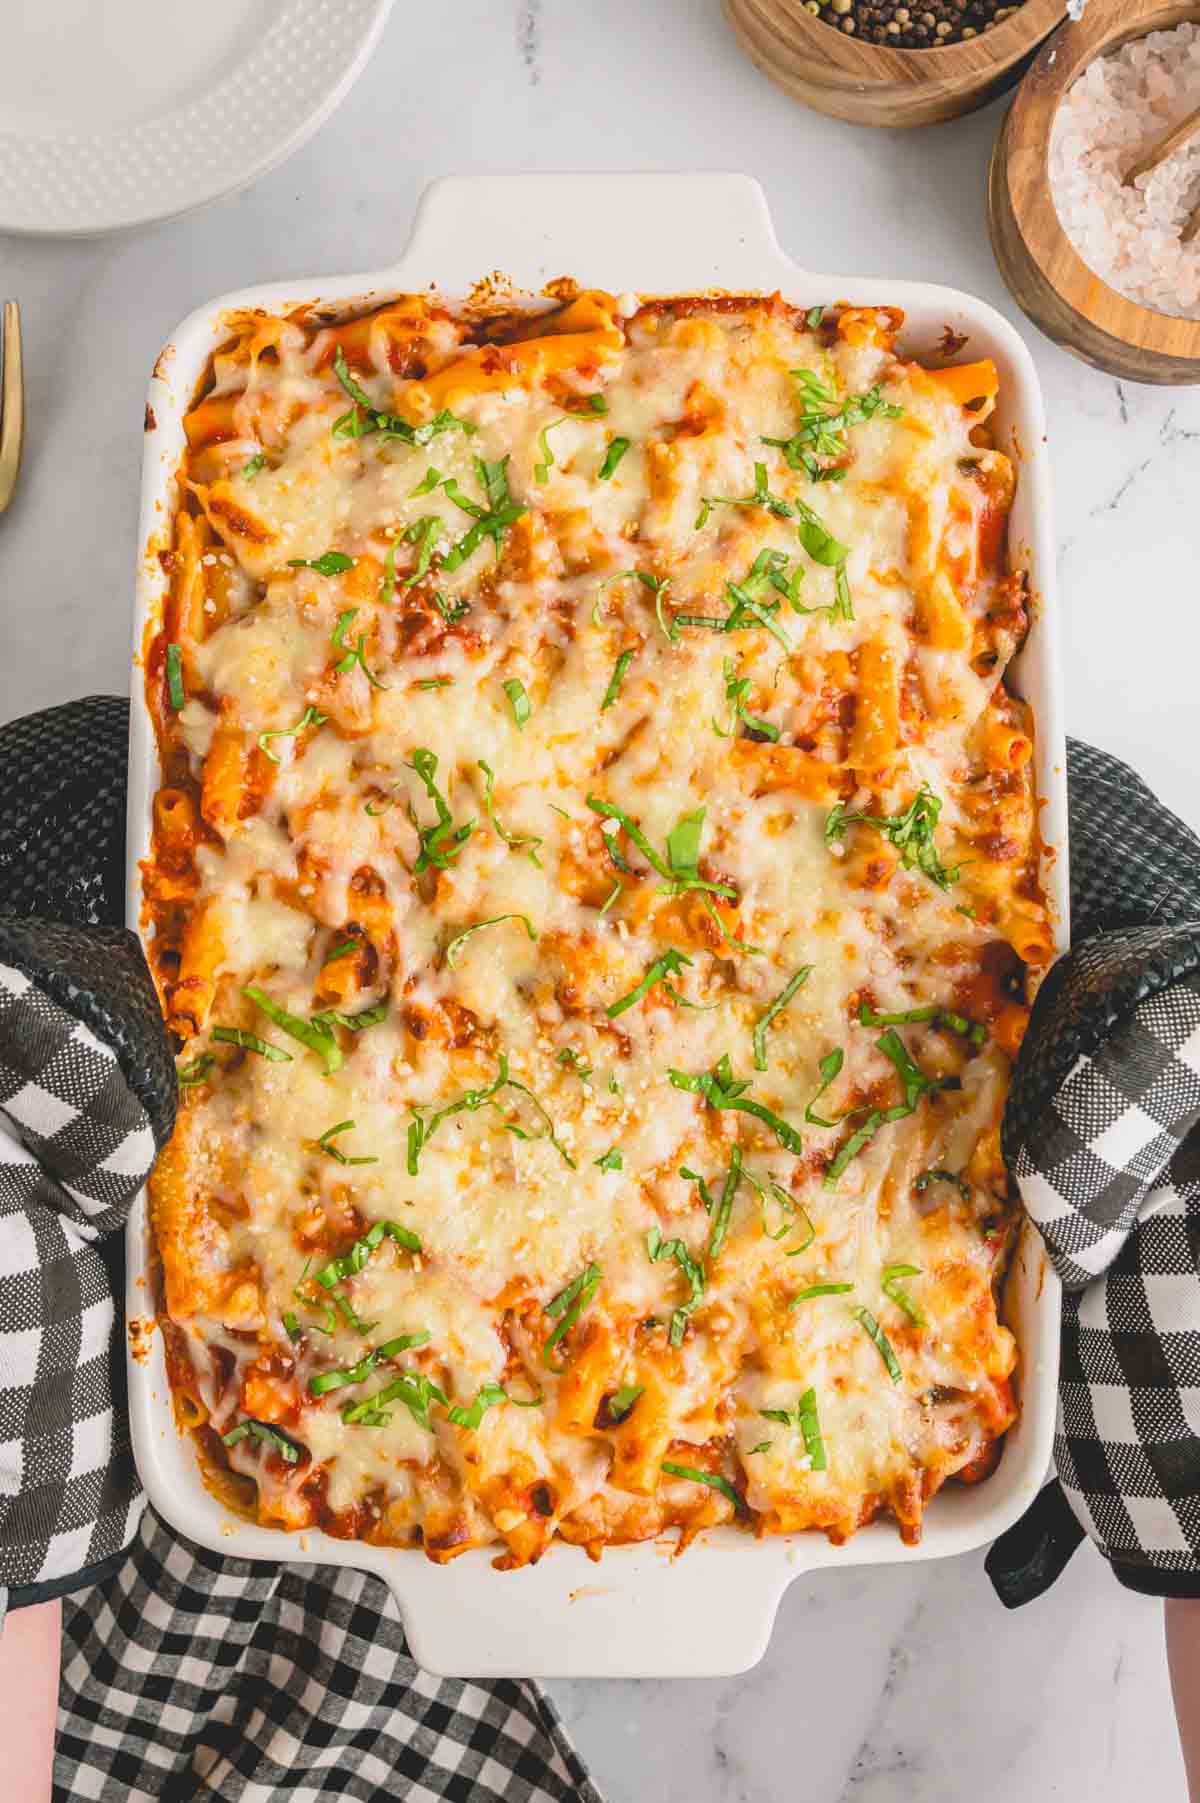 Overhead image of two holding a baking dish full of baked ziti with sausage with oven mitts.